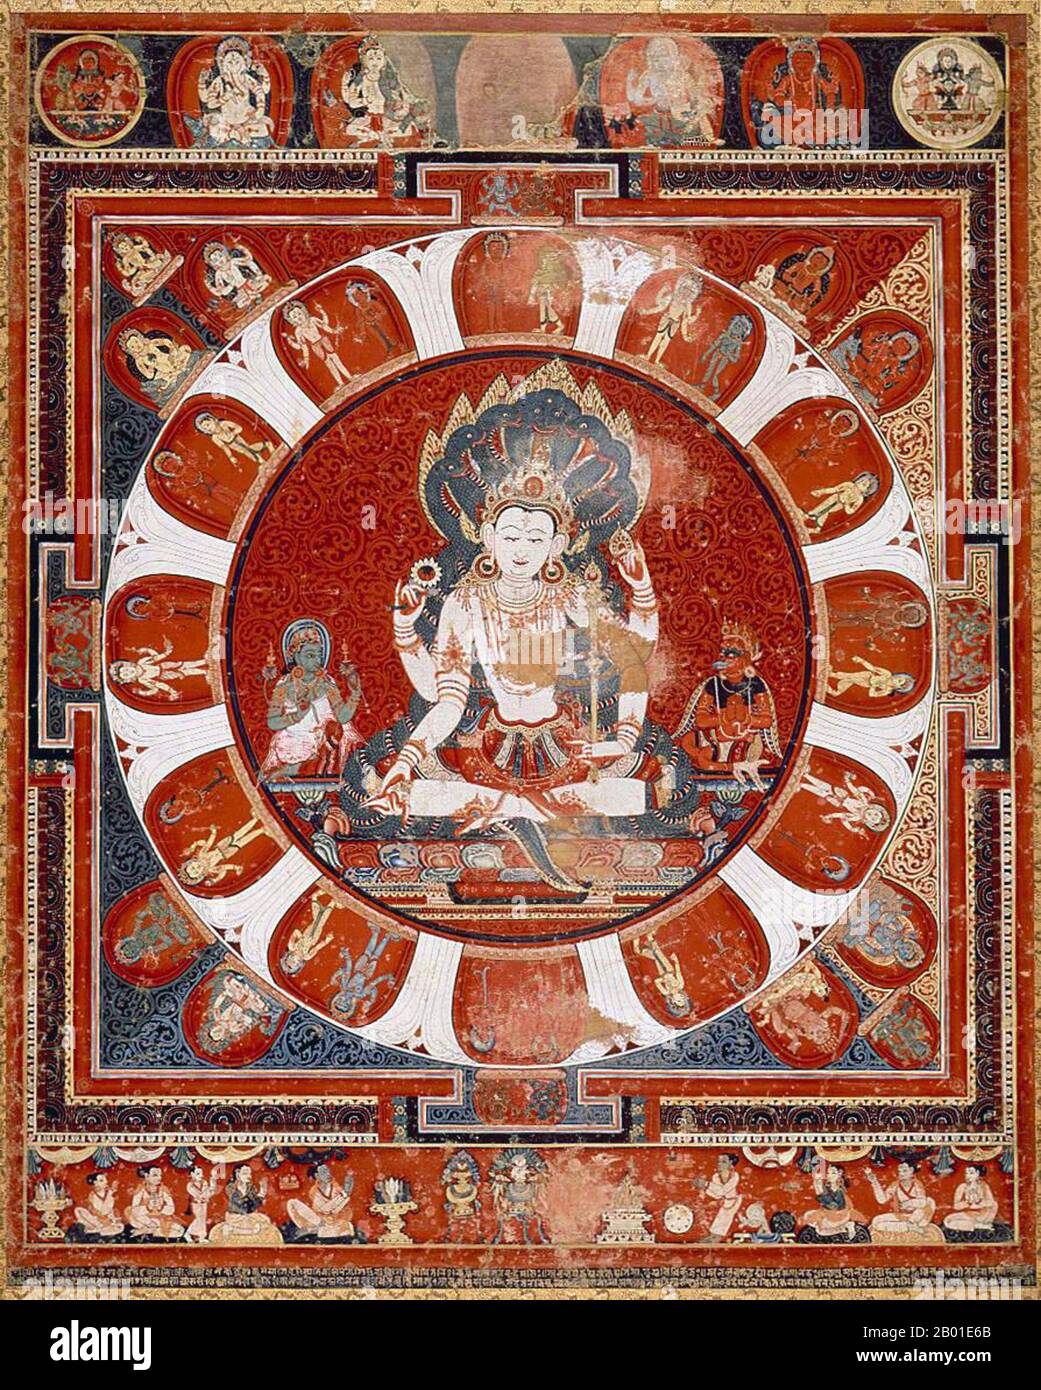 Nepal: Vishnu mandala paubha (religious painting) on cotton cloth by Jayateja (fl. 15th century), early 15th century.  Vishnu (Sanskrit विष्णु Viṣṇu) is the Supreme god in the Vaishnavite tradition of Hinduism. Smarta followers of Adi Shankara, among others, venerate Vishnu as one of the five primary forms of God.  The Vishnu Sahasranama declares Vishnu as Paramatma (supreme soul) and Parameshwara (supreme God). It describes Vishnu as the All-Pervading essence of all beings, the master of - and beyond - the past, present and future, one who supports, sustains and governs the Universe. Stock Photo